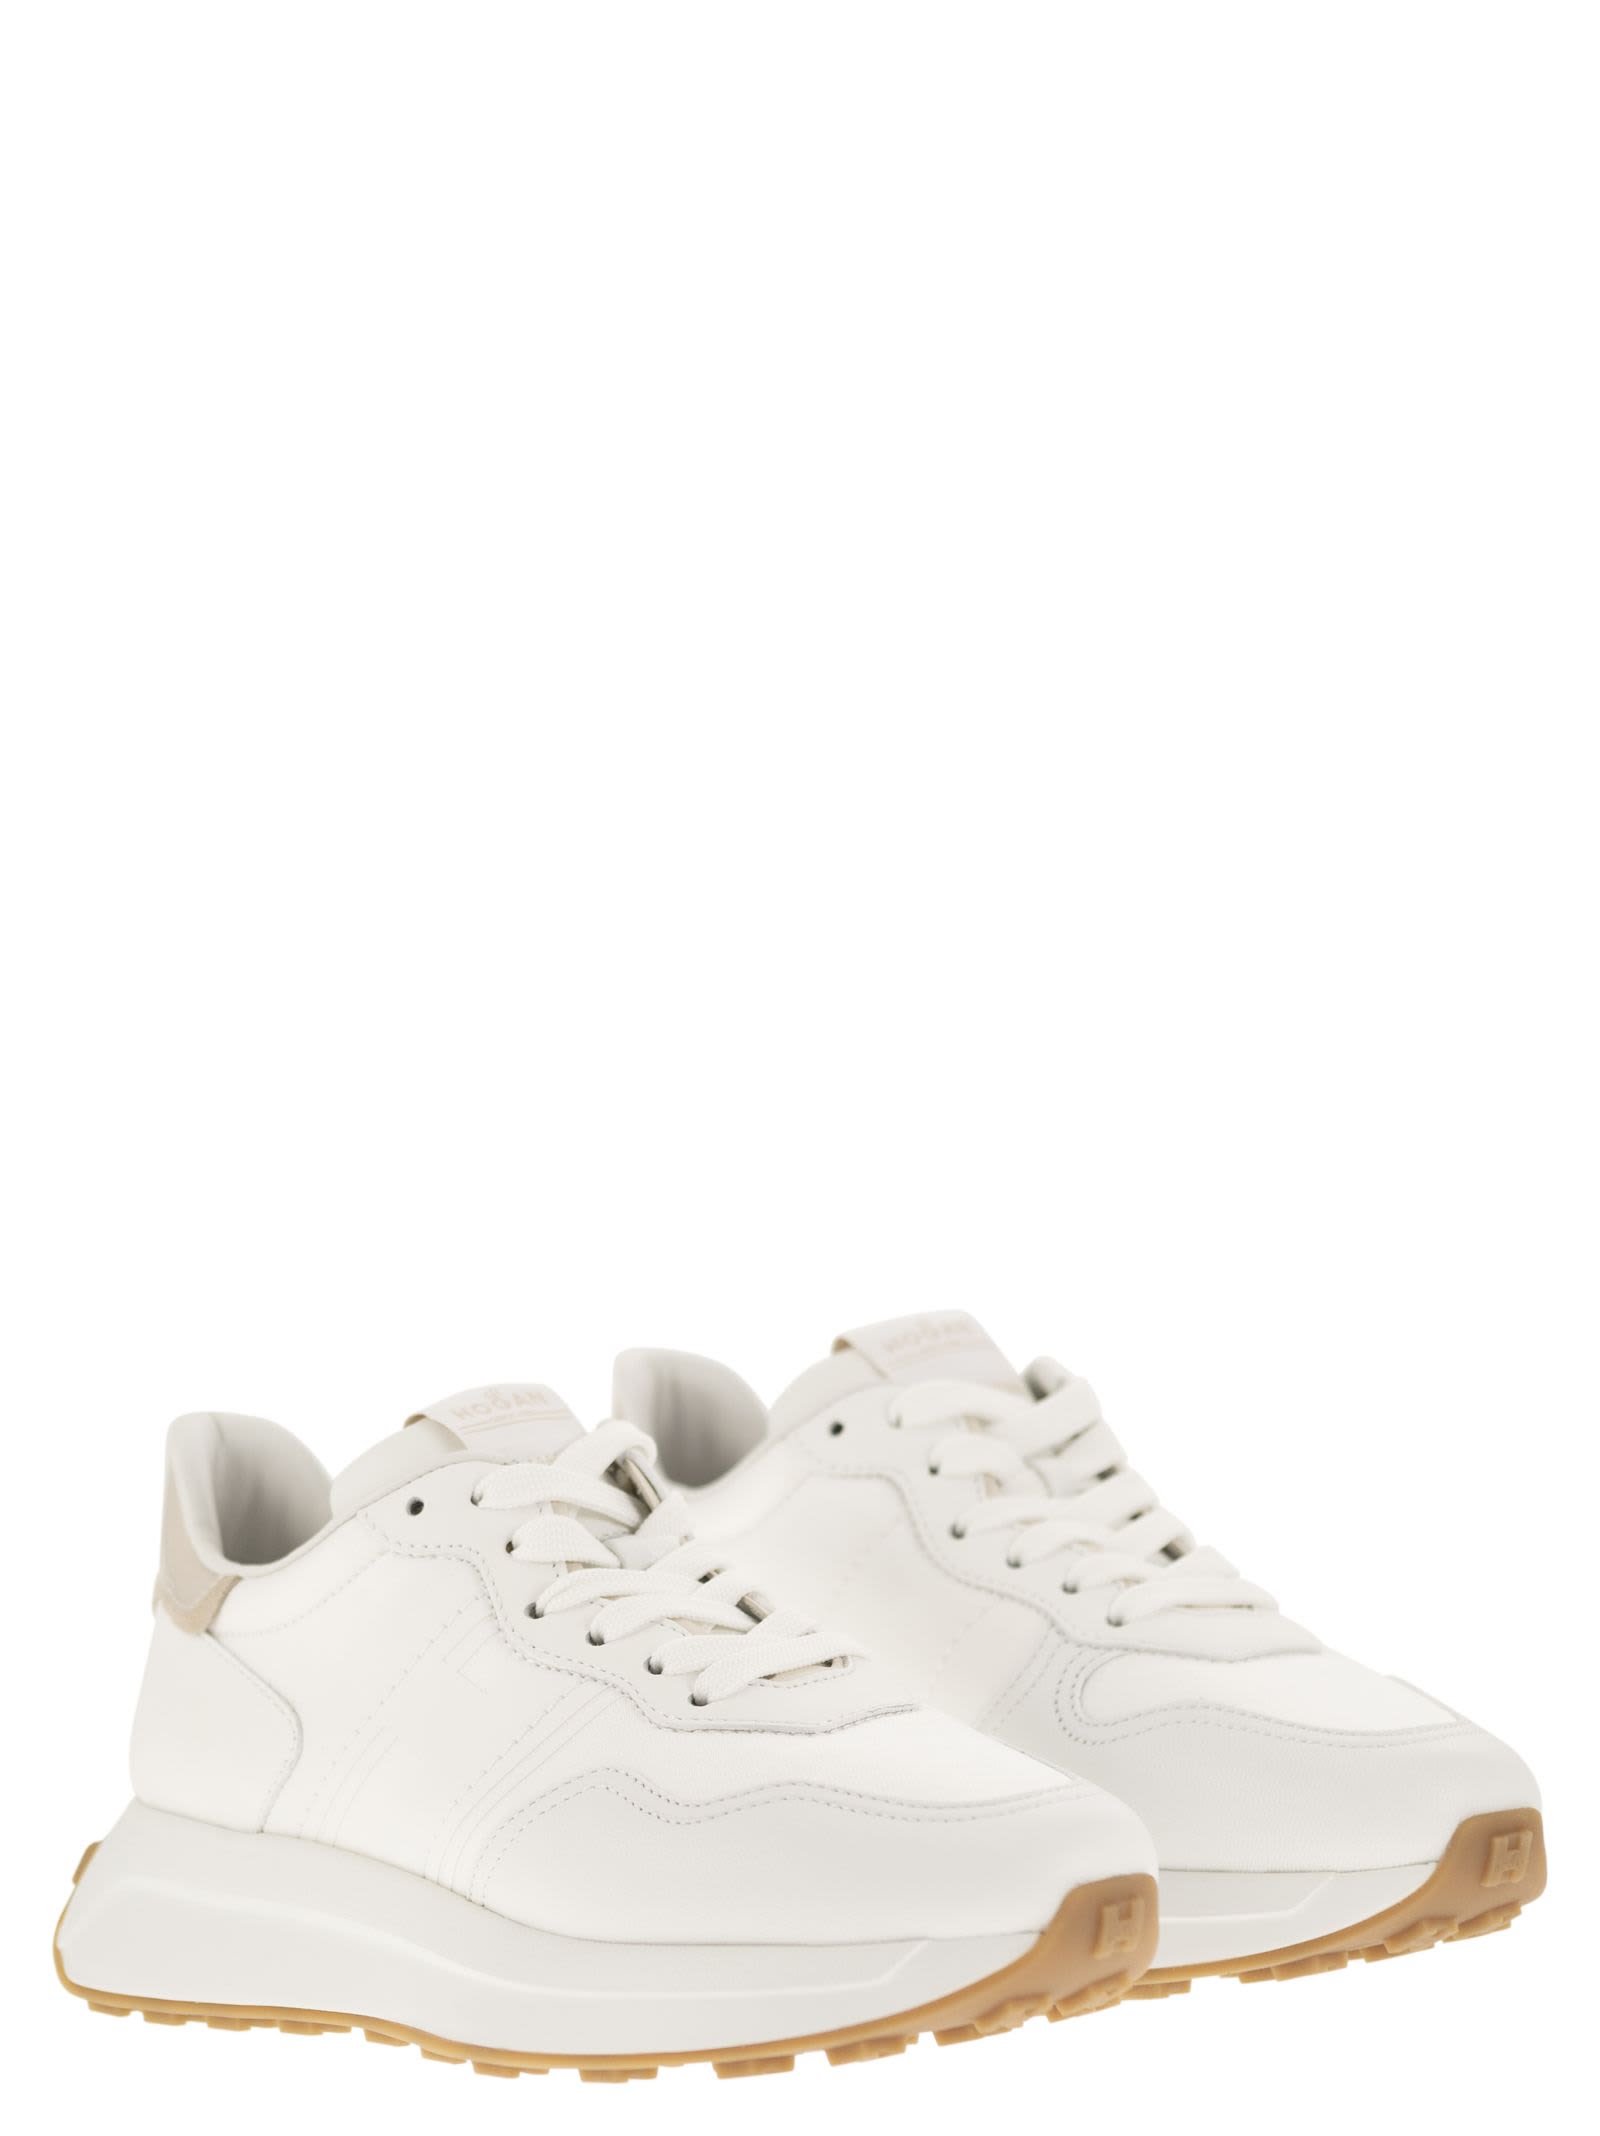 Shop Hogan H641 - Sneakers In White